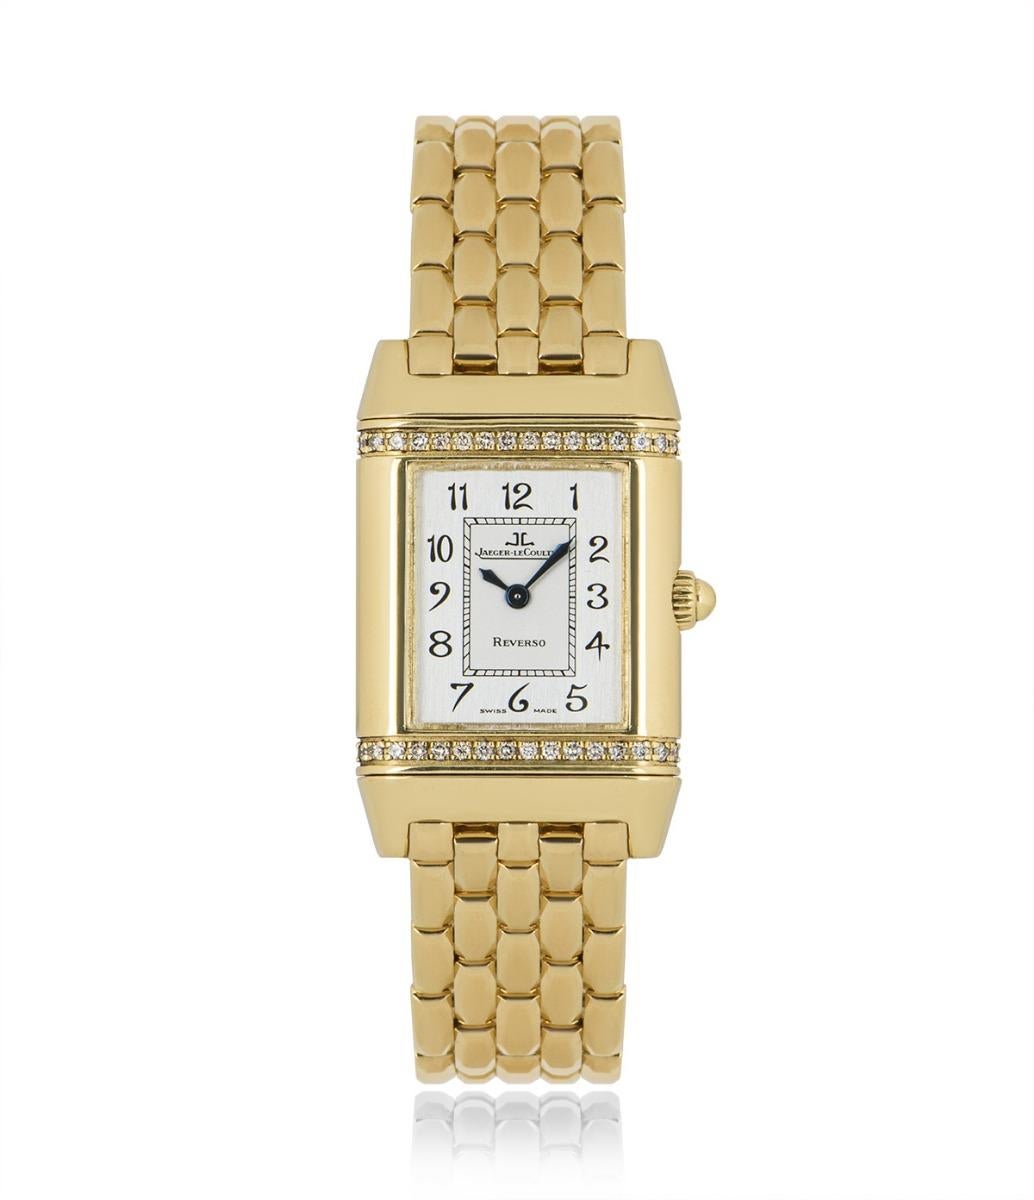 A 21 mm yellow gold Reverso by Jaeger LeCoultre, featuring a silver dial with blued steel hands. The bezel, including the reverse side, is set with a total of approximately 64 round brilliant cut diamonds. A yellow gold bracelet is accompanied by a